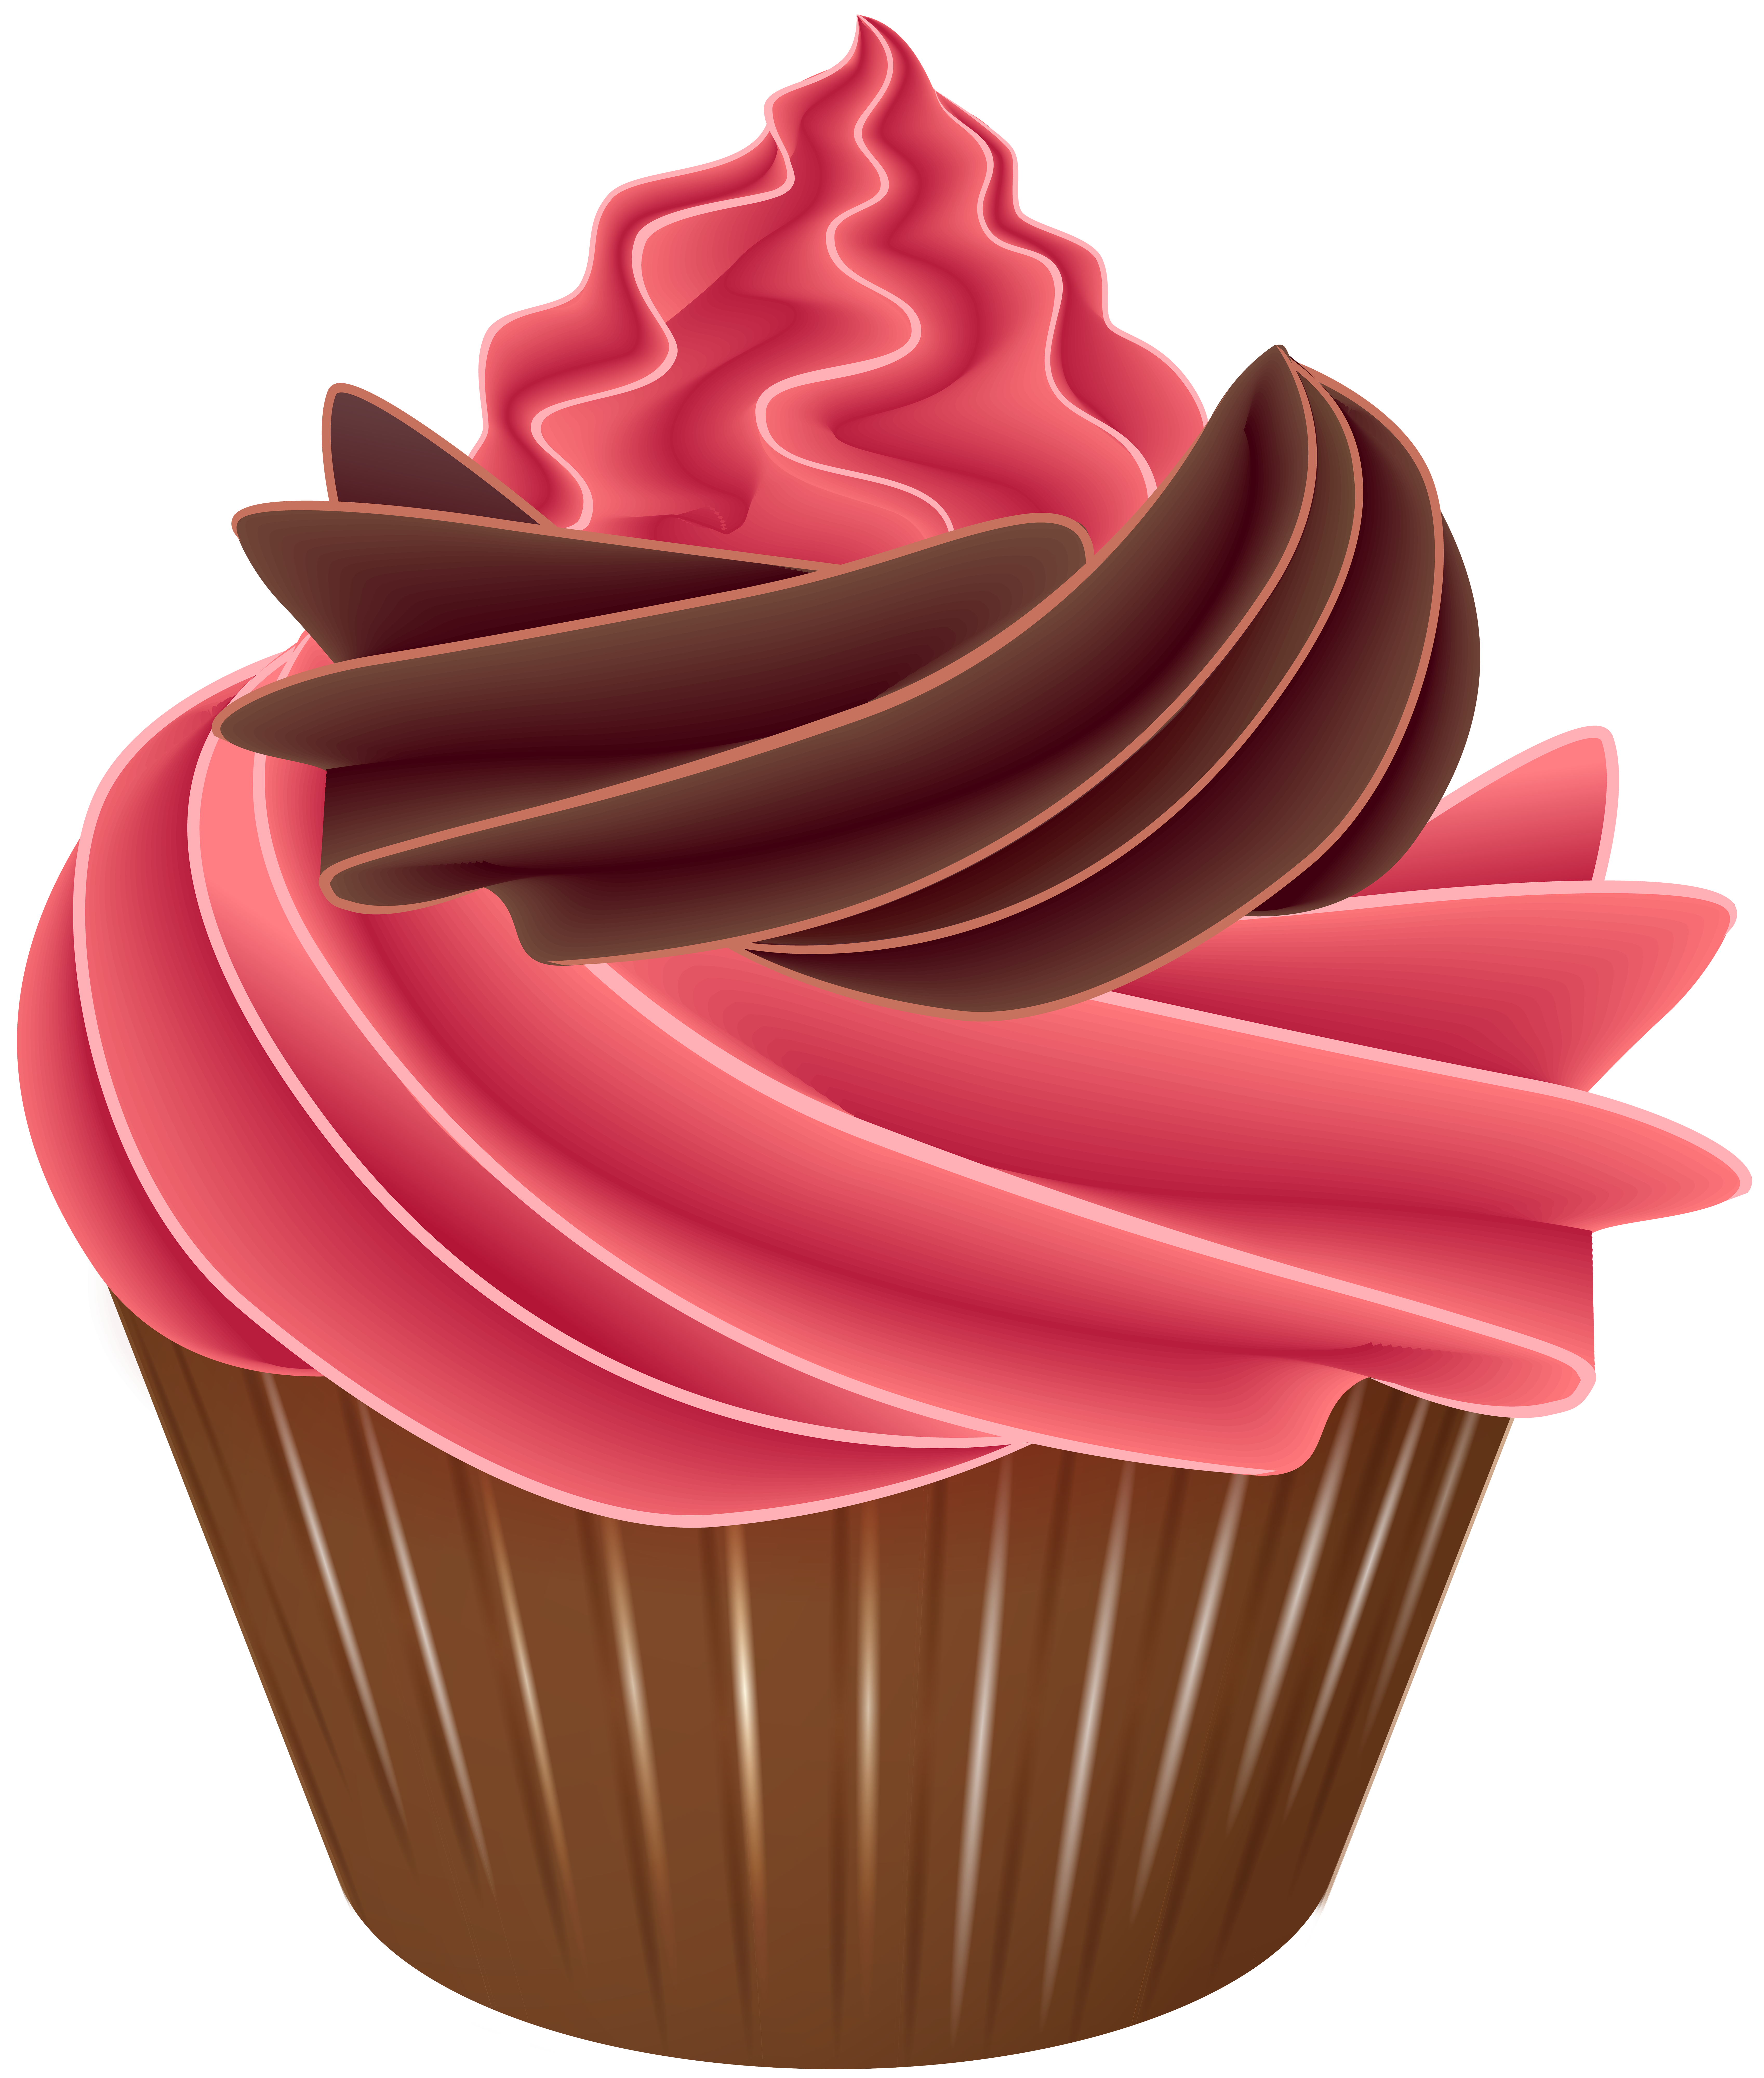 Png clip art image. Clipart cupcake easter